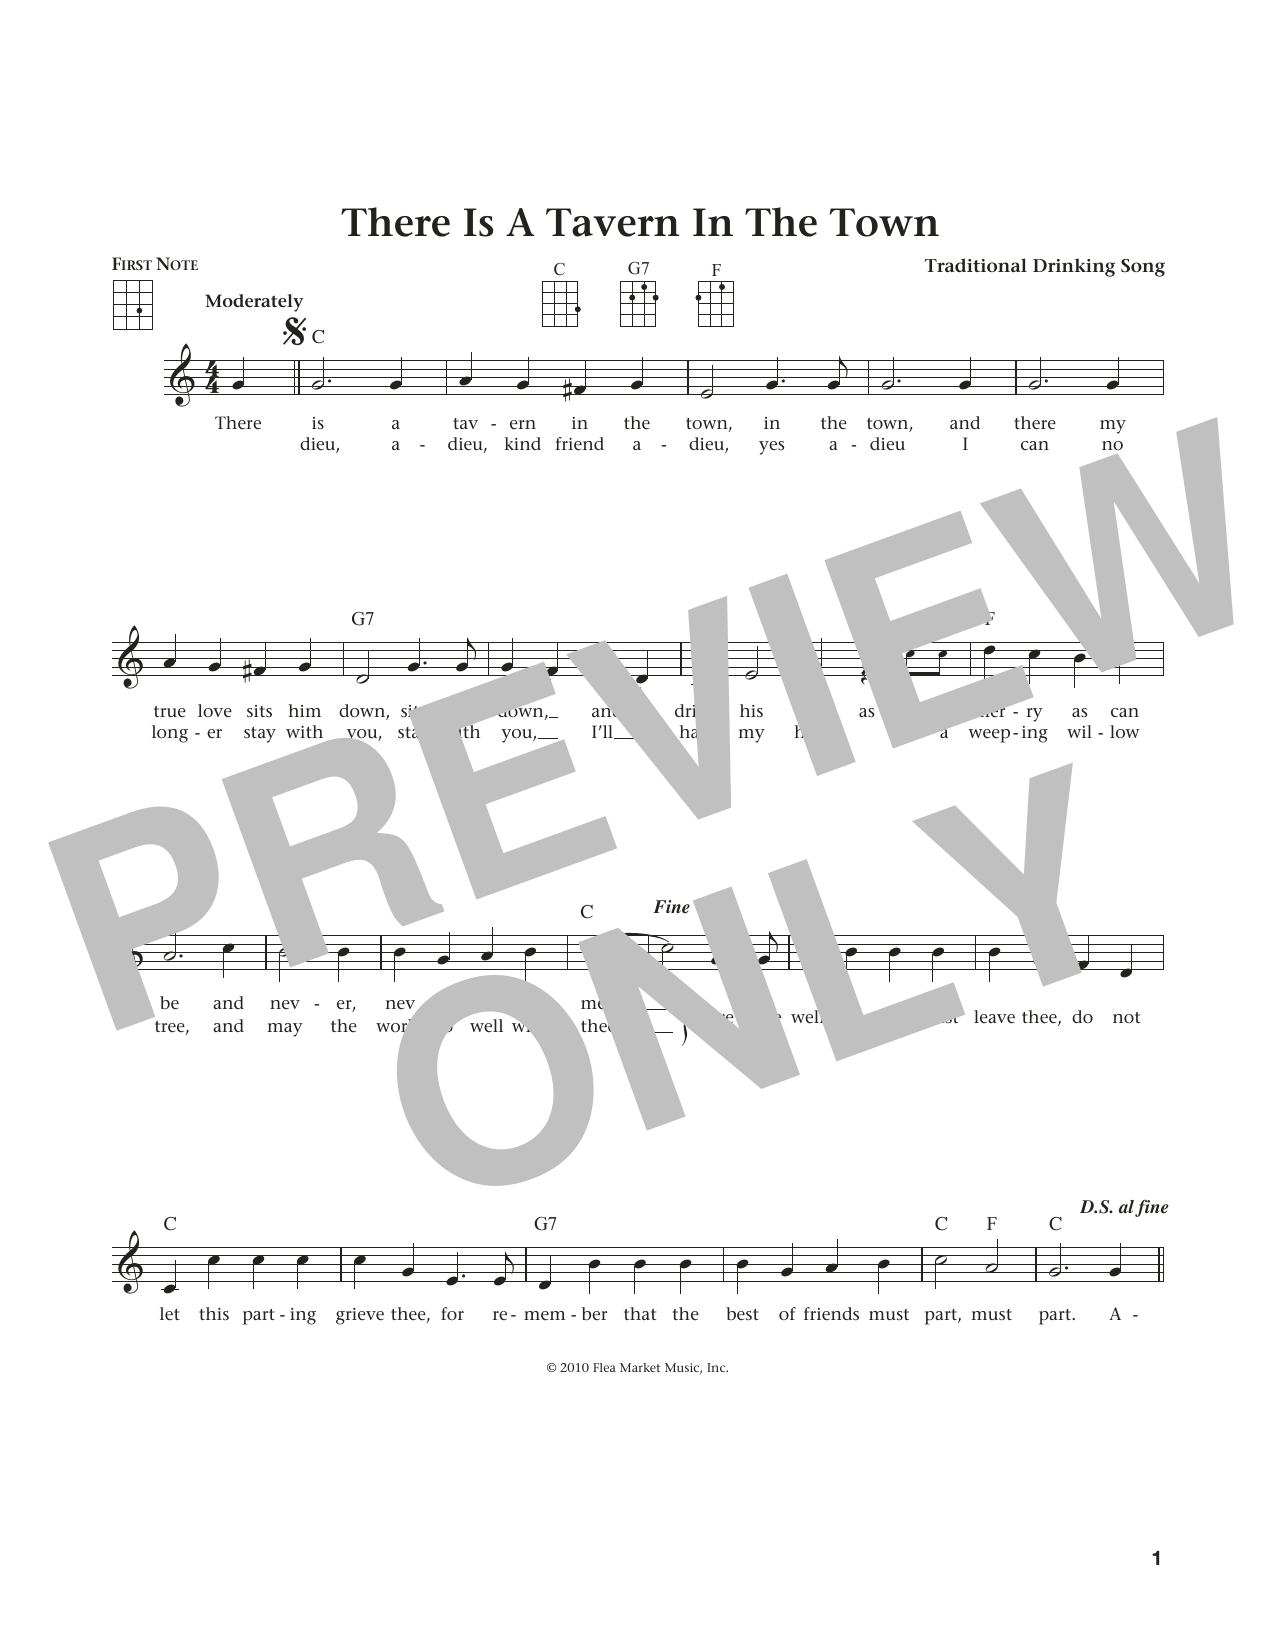 Download Traditional Drinking Song There Is A Tavern In The Town (from The Sheet Music